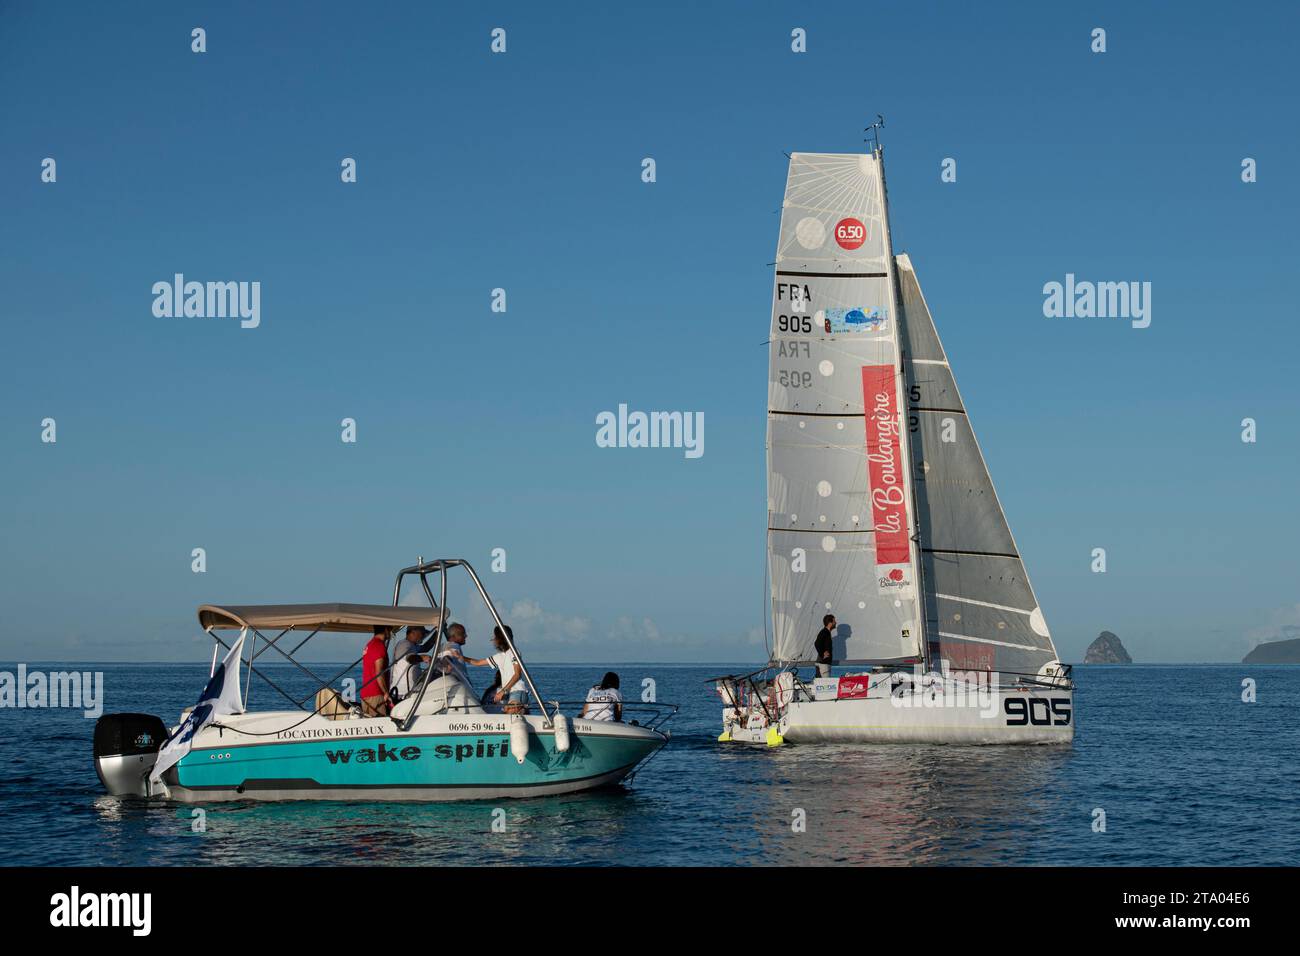 Nicolas D'ESTAIS, Cheminant Ursuit, 2nd of the production boat category of the 2 leg in 13 jours, 21 heures, 05 minutes et 44 secondes during the arrival of the Mini Transat La Boulangere 2019, Class 6,50 sailing race between La Rochelle - Las Palmas de Gran Canaria - Le Marin, from Le Marin, France on November 16, 2019 - Photo Olivier Blanchet / DPPI Stock Photo